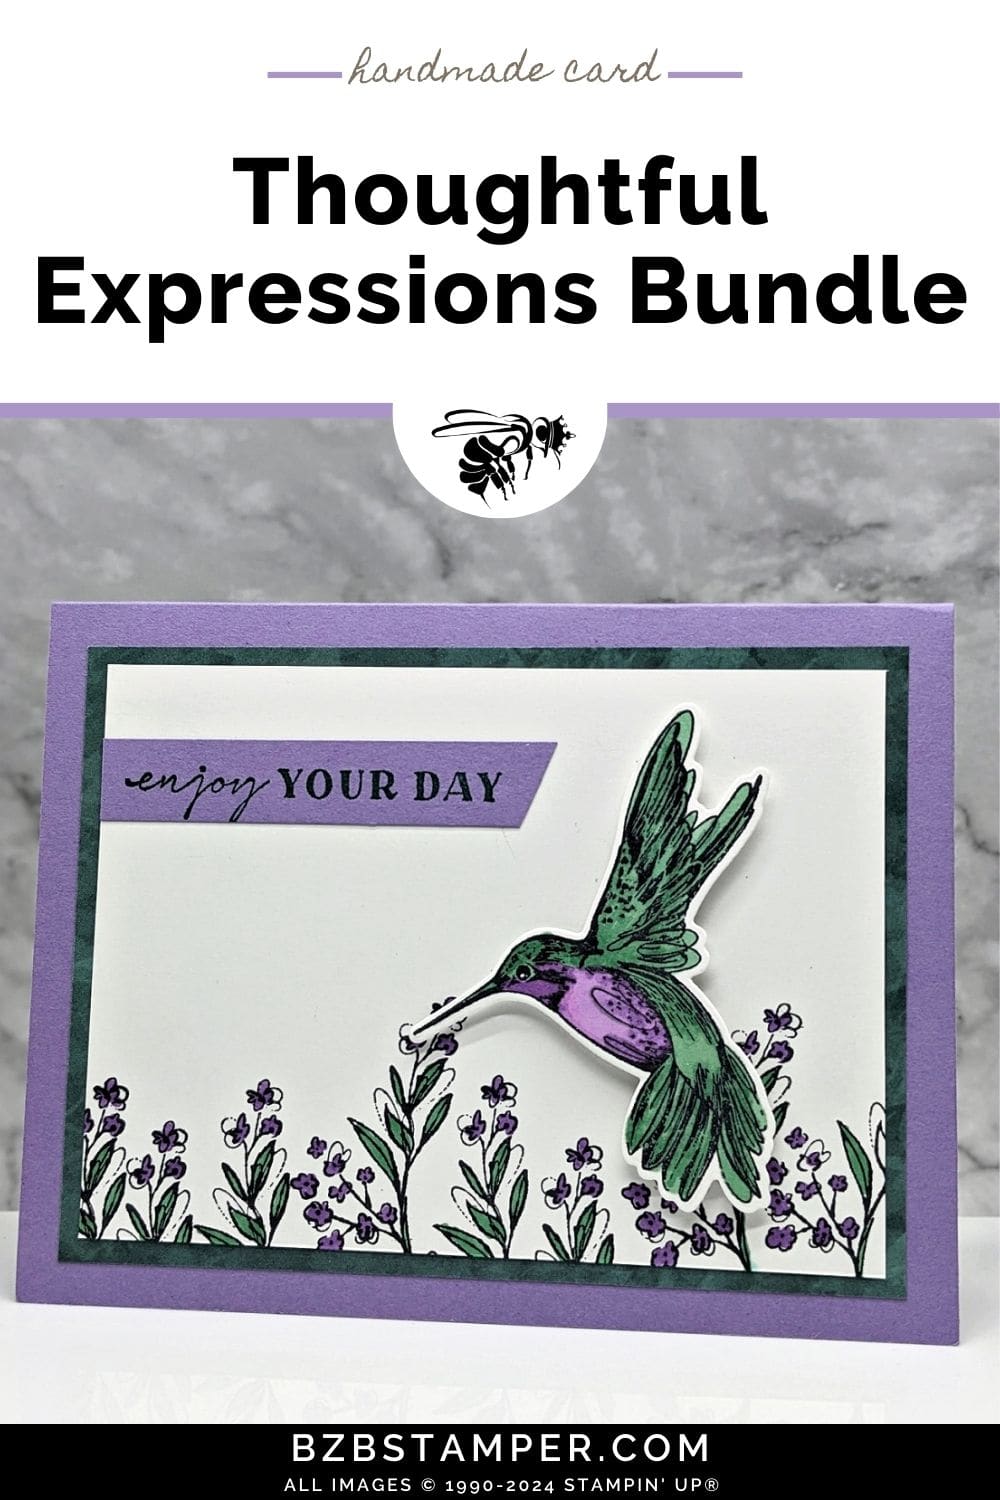 Embrace Creativity with the Thoughtful Expressions Bundle in purple and green featuring flowers and a hummingbird and an "enjoy your day" sentiment.